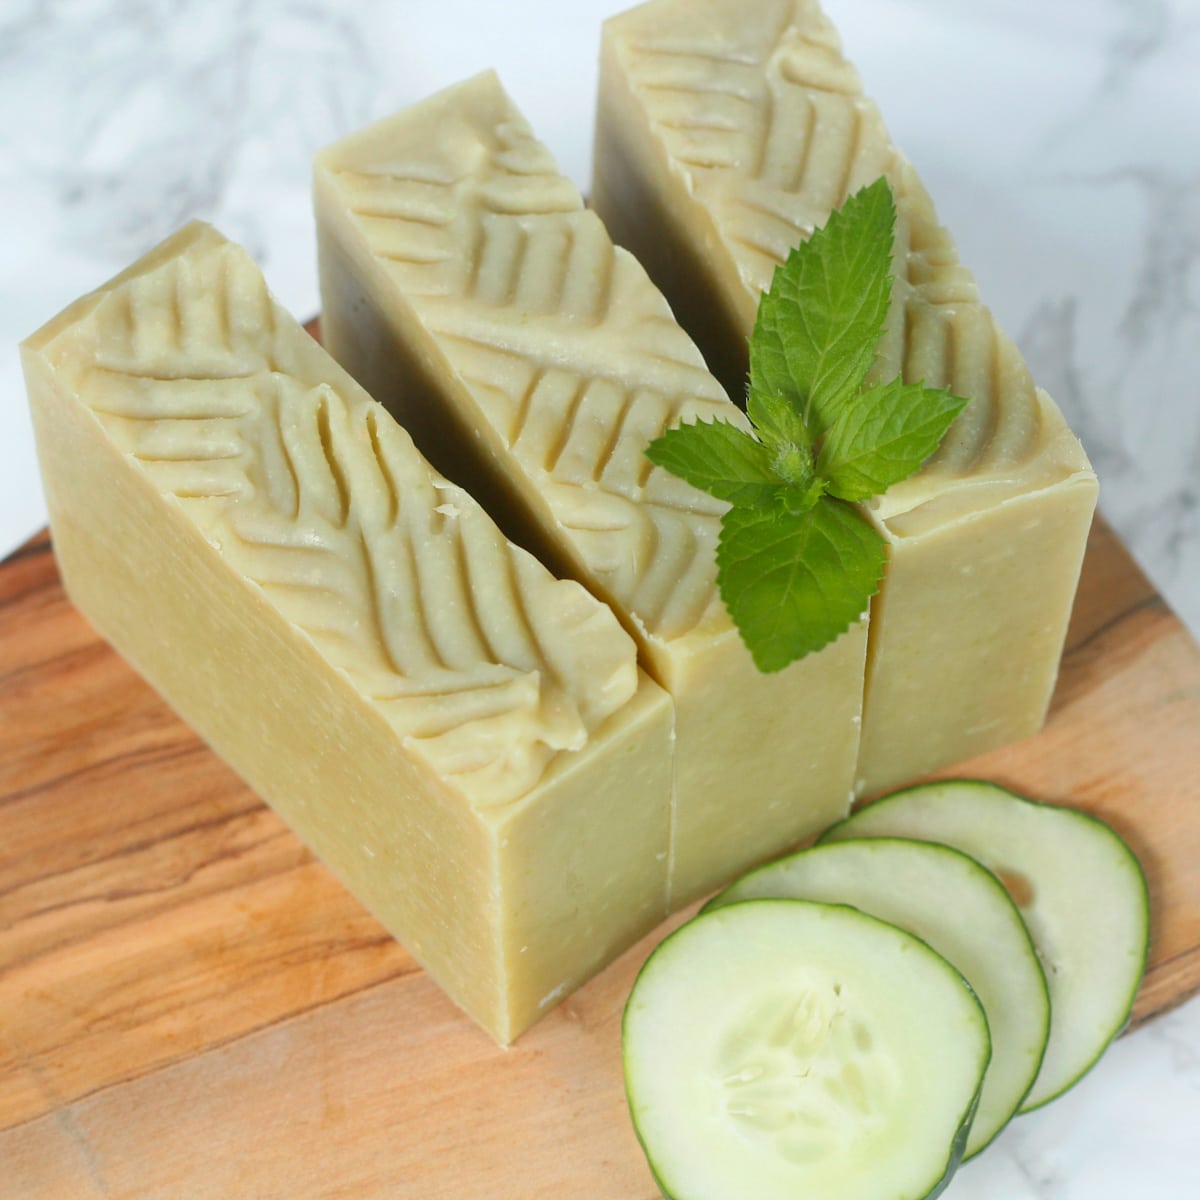 soap with cucumber slices and mint leaf.